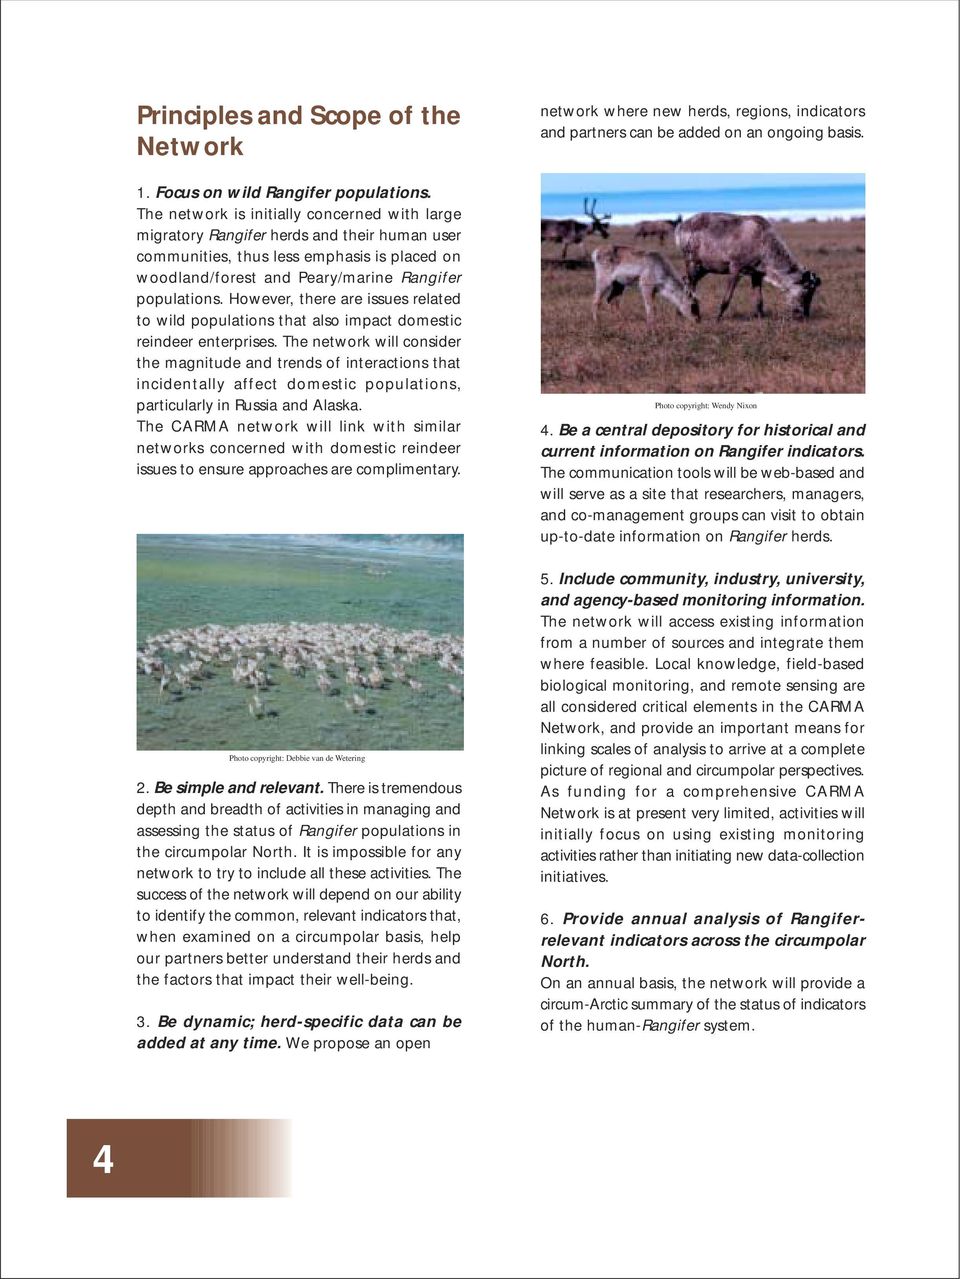 However, there are issues related to wild populations that also impact domestic reindeer enterprises.